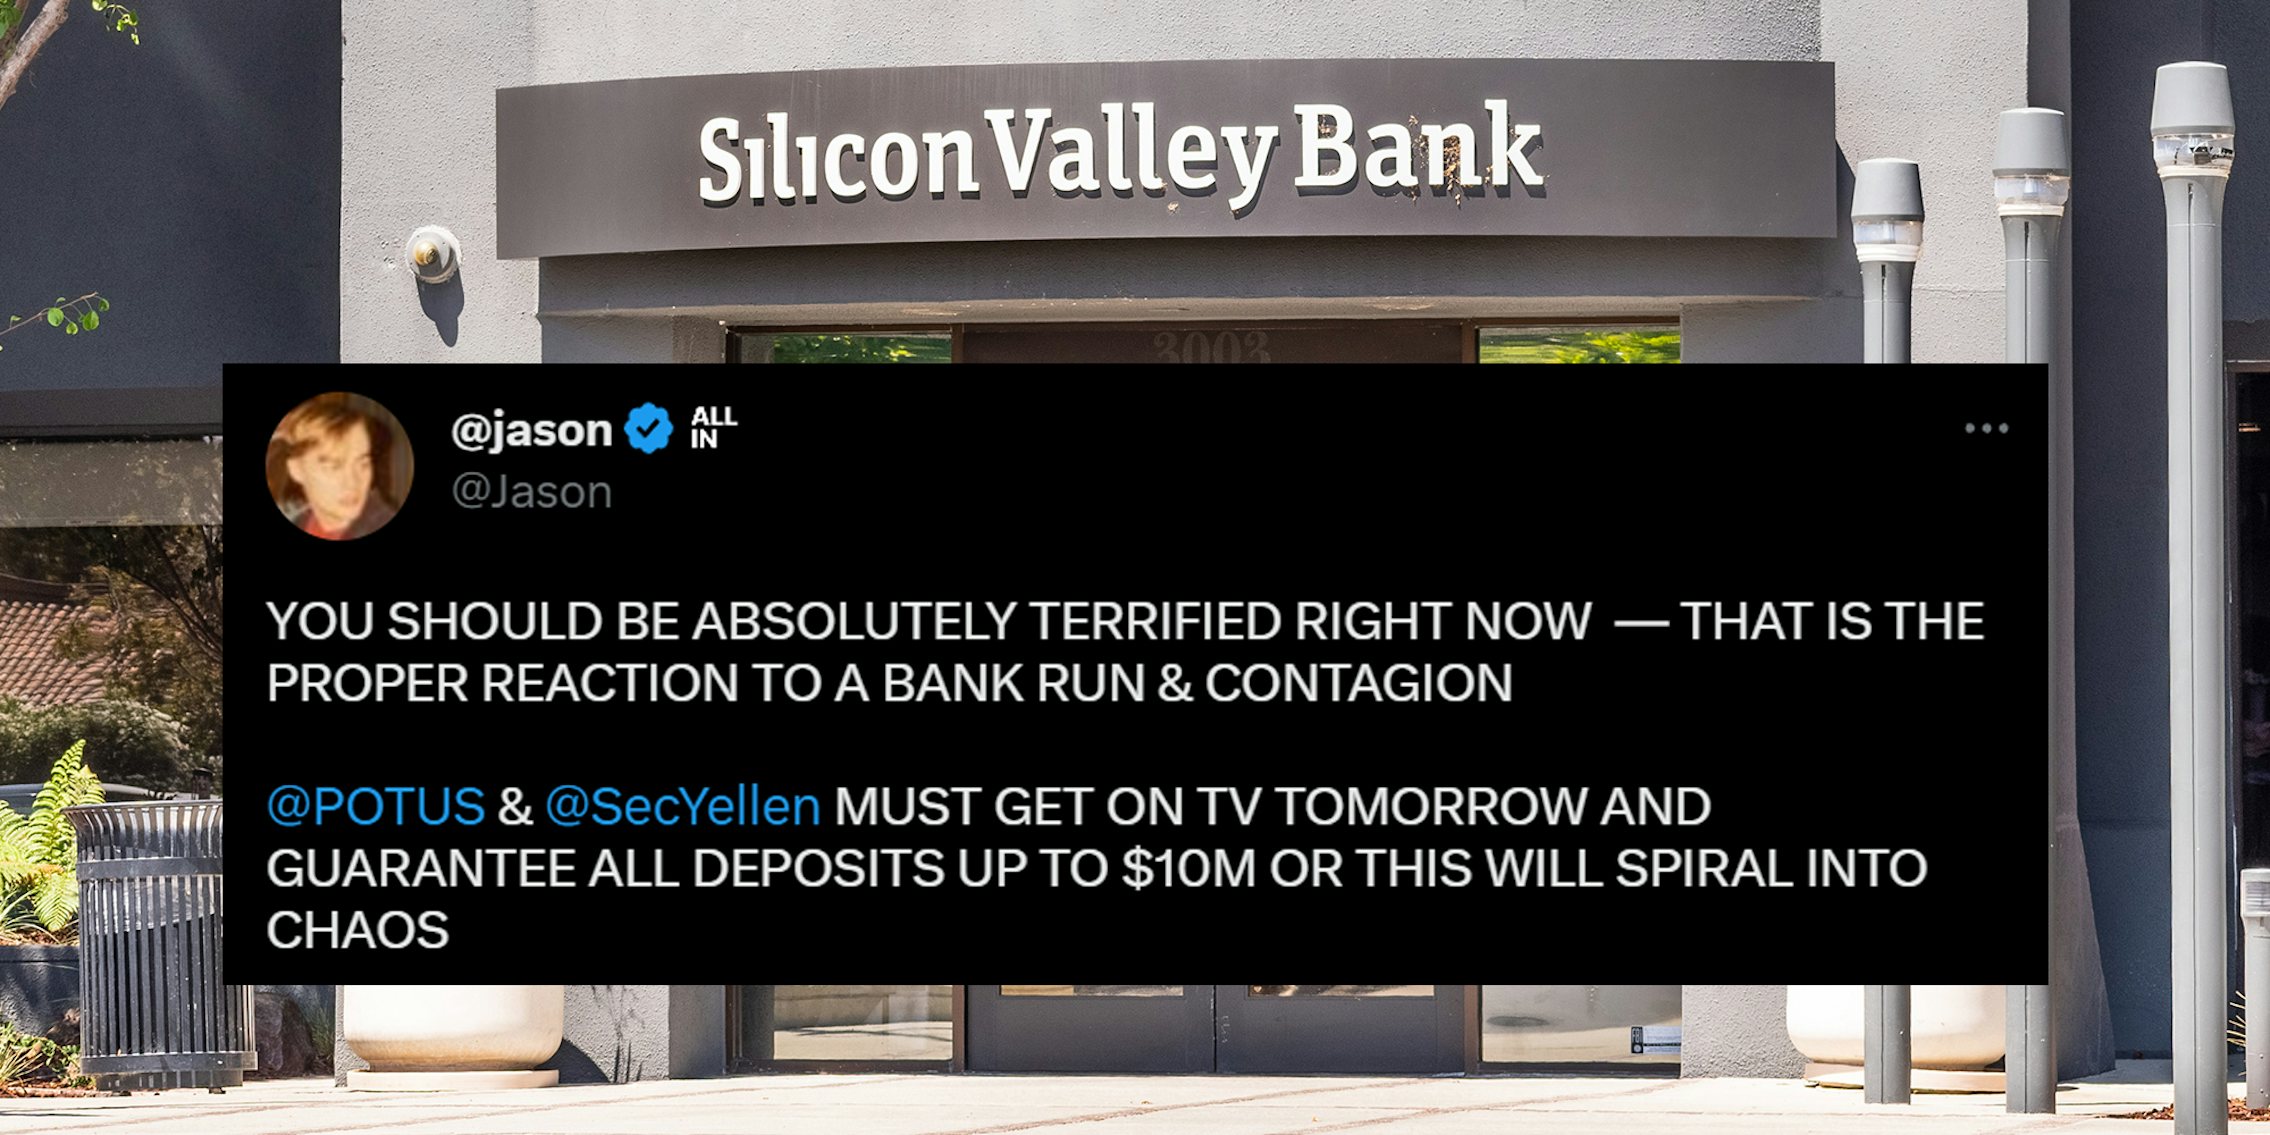 silicon valley bank entrance with tweet from @jason 'YOU SHOULD BE ABSOLUTELY TERRIFIED RIGHT NOW - THAT IS THE PROPER REACTION TO A BANK RUN & CONTAGION. @POTUS % @SECYELLEN MUST GET ON TV TOMORROW AND GUARANTEE ALL DEPOSITS UP TO $10m OR THIS WILL SPIRAL INTO CHAOS'